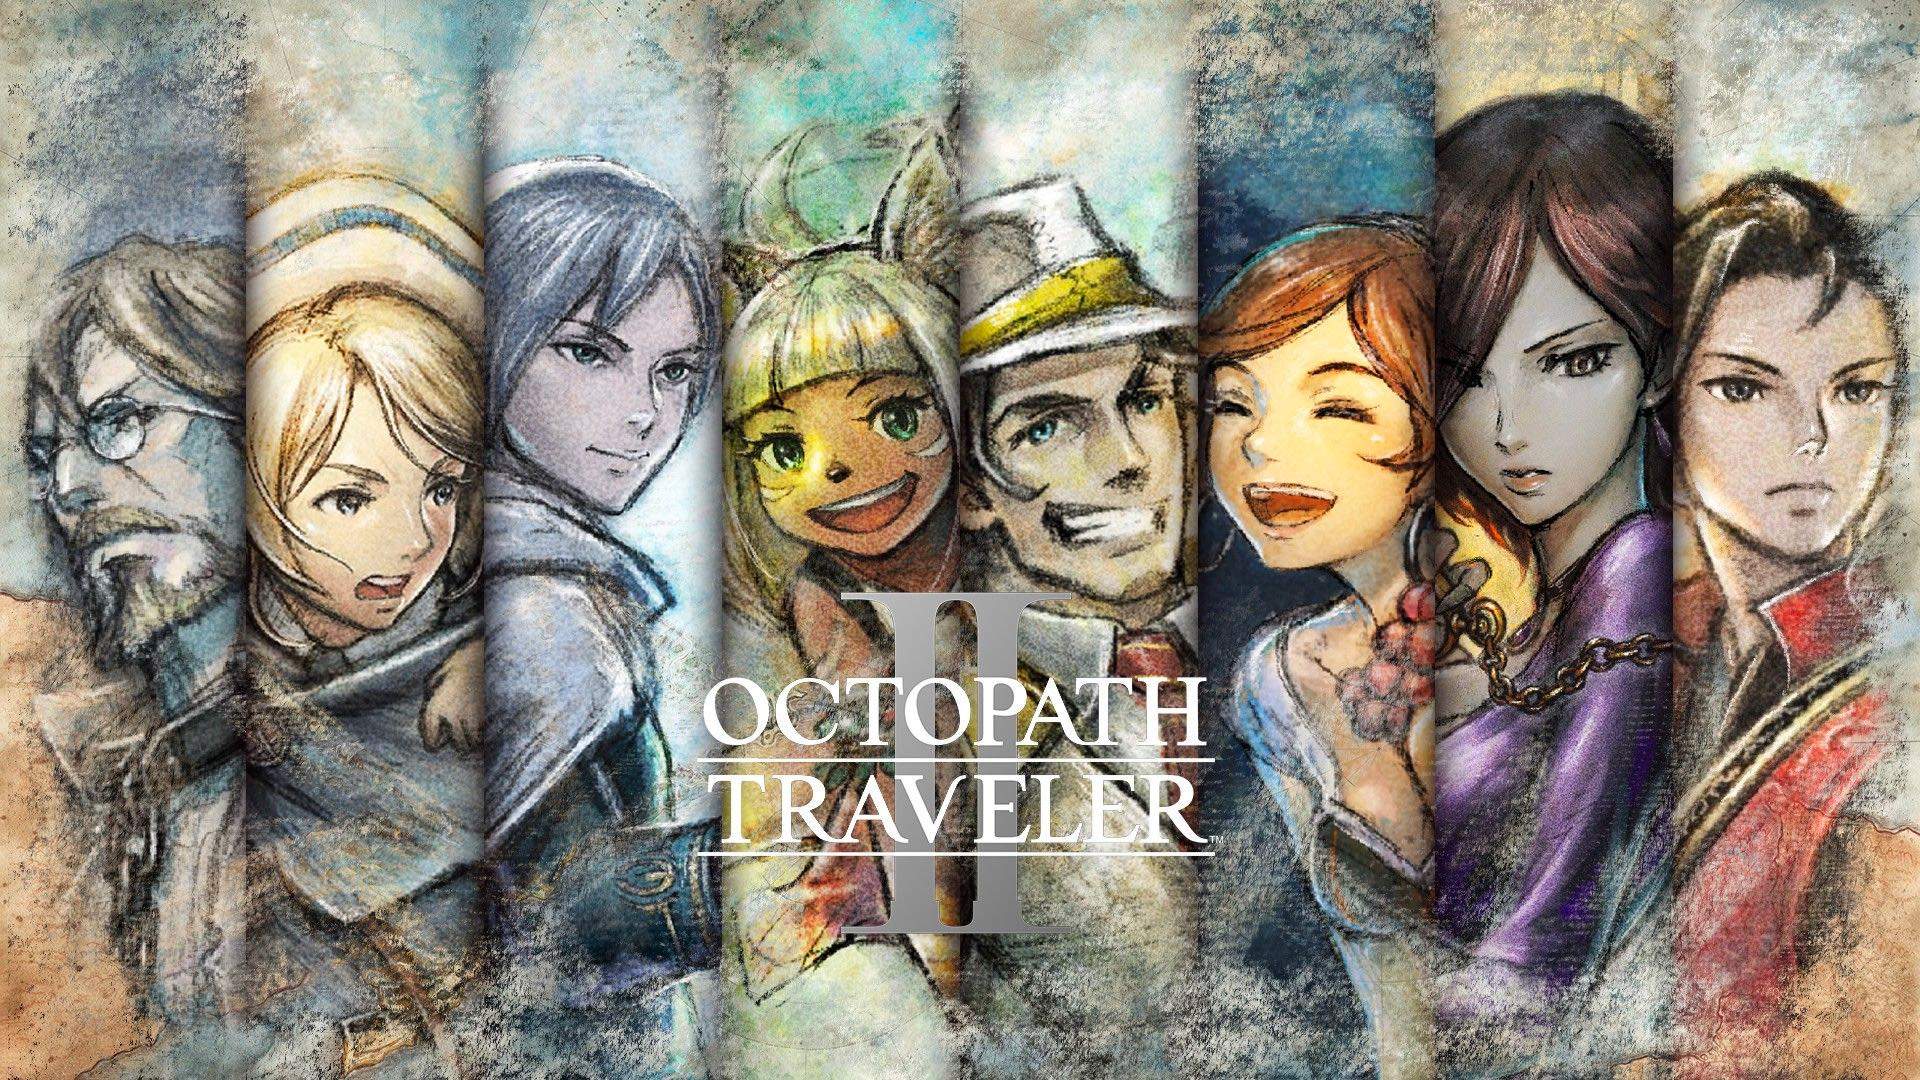 The 8 characters of the game are shown behind the Octopath Traveler II and console platforms logos